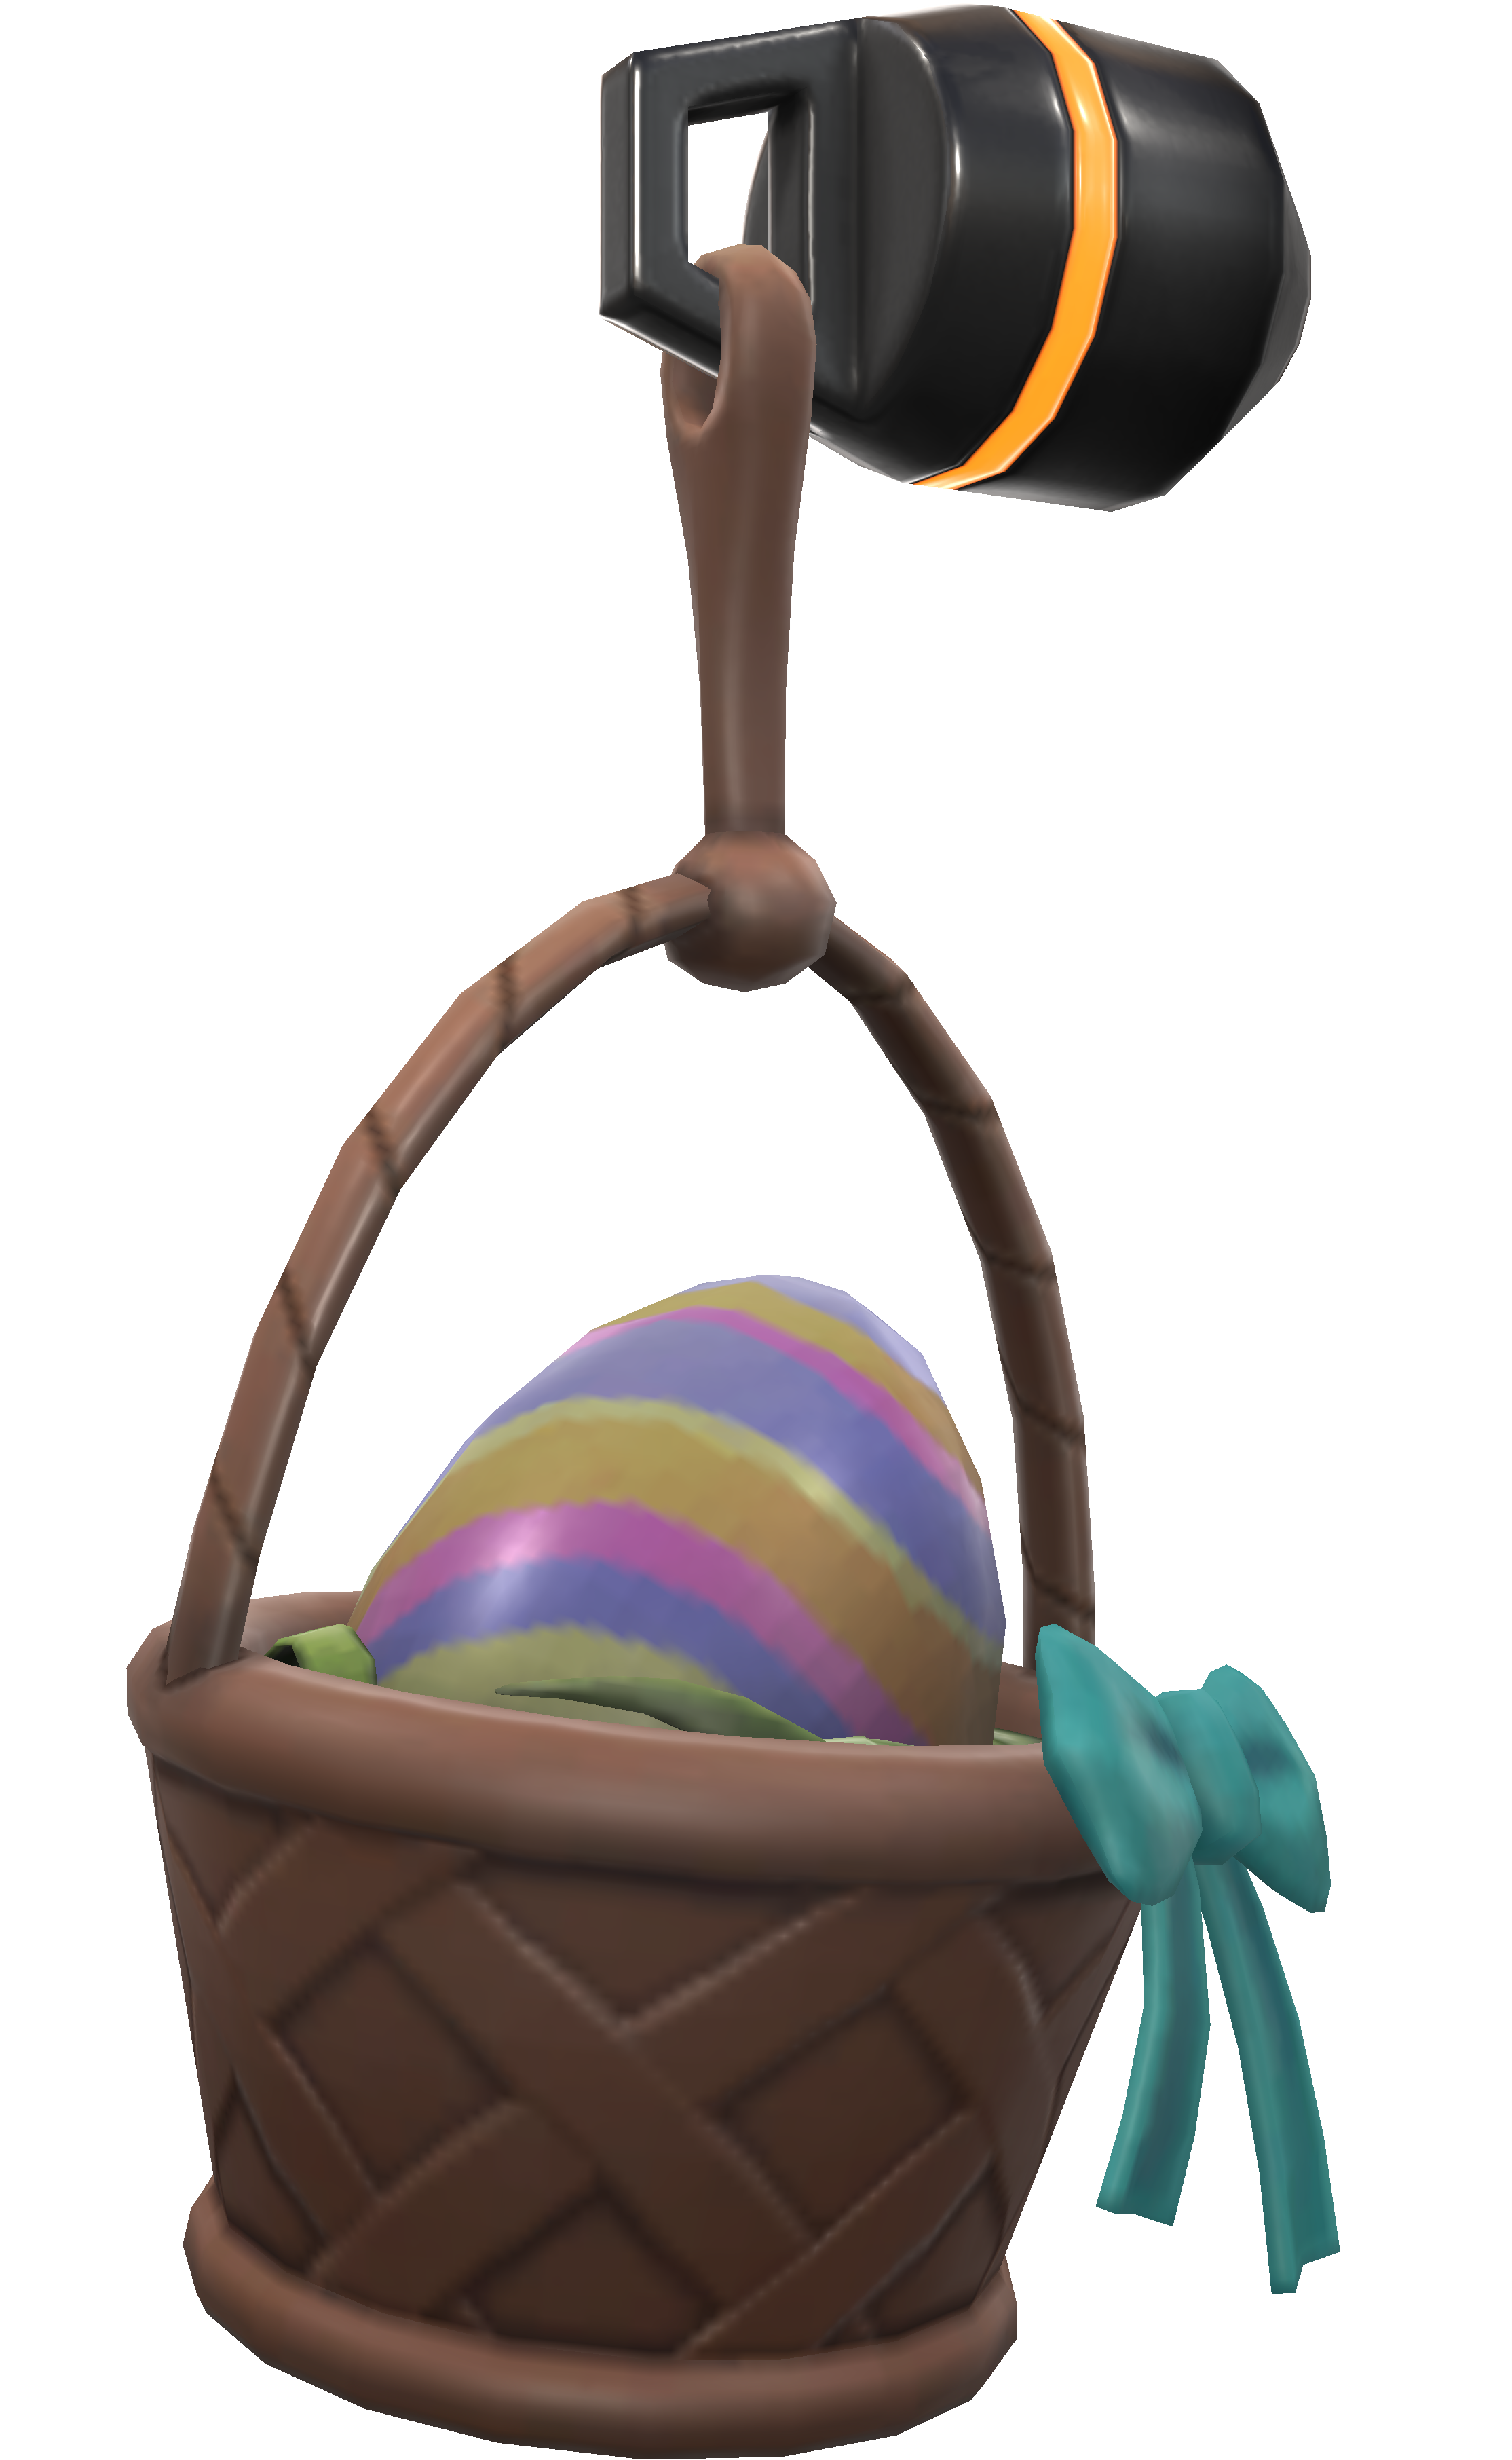 Egg_in_a_Basket_SideView